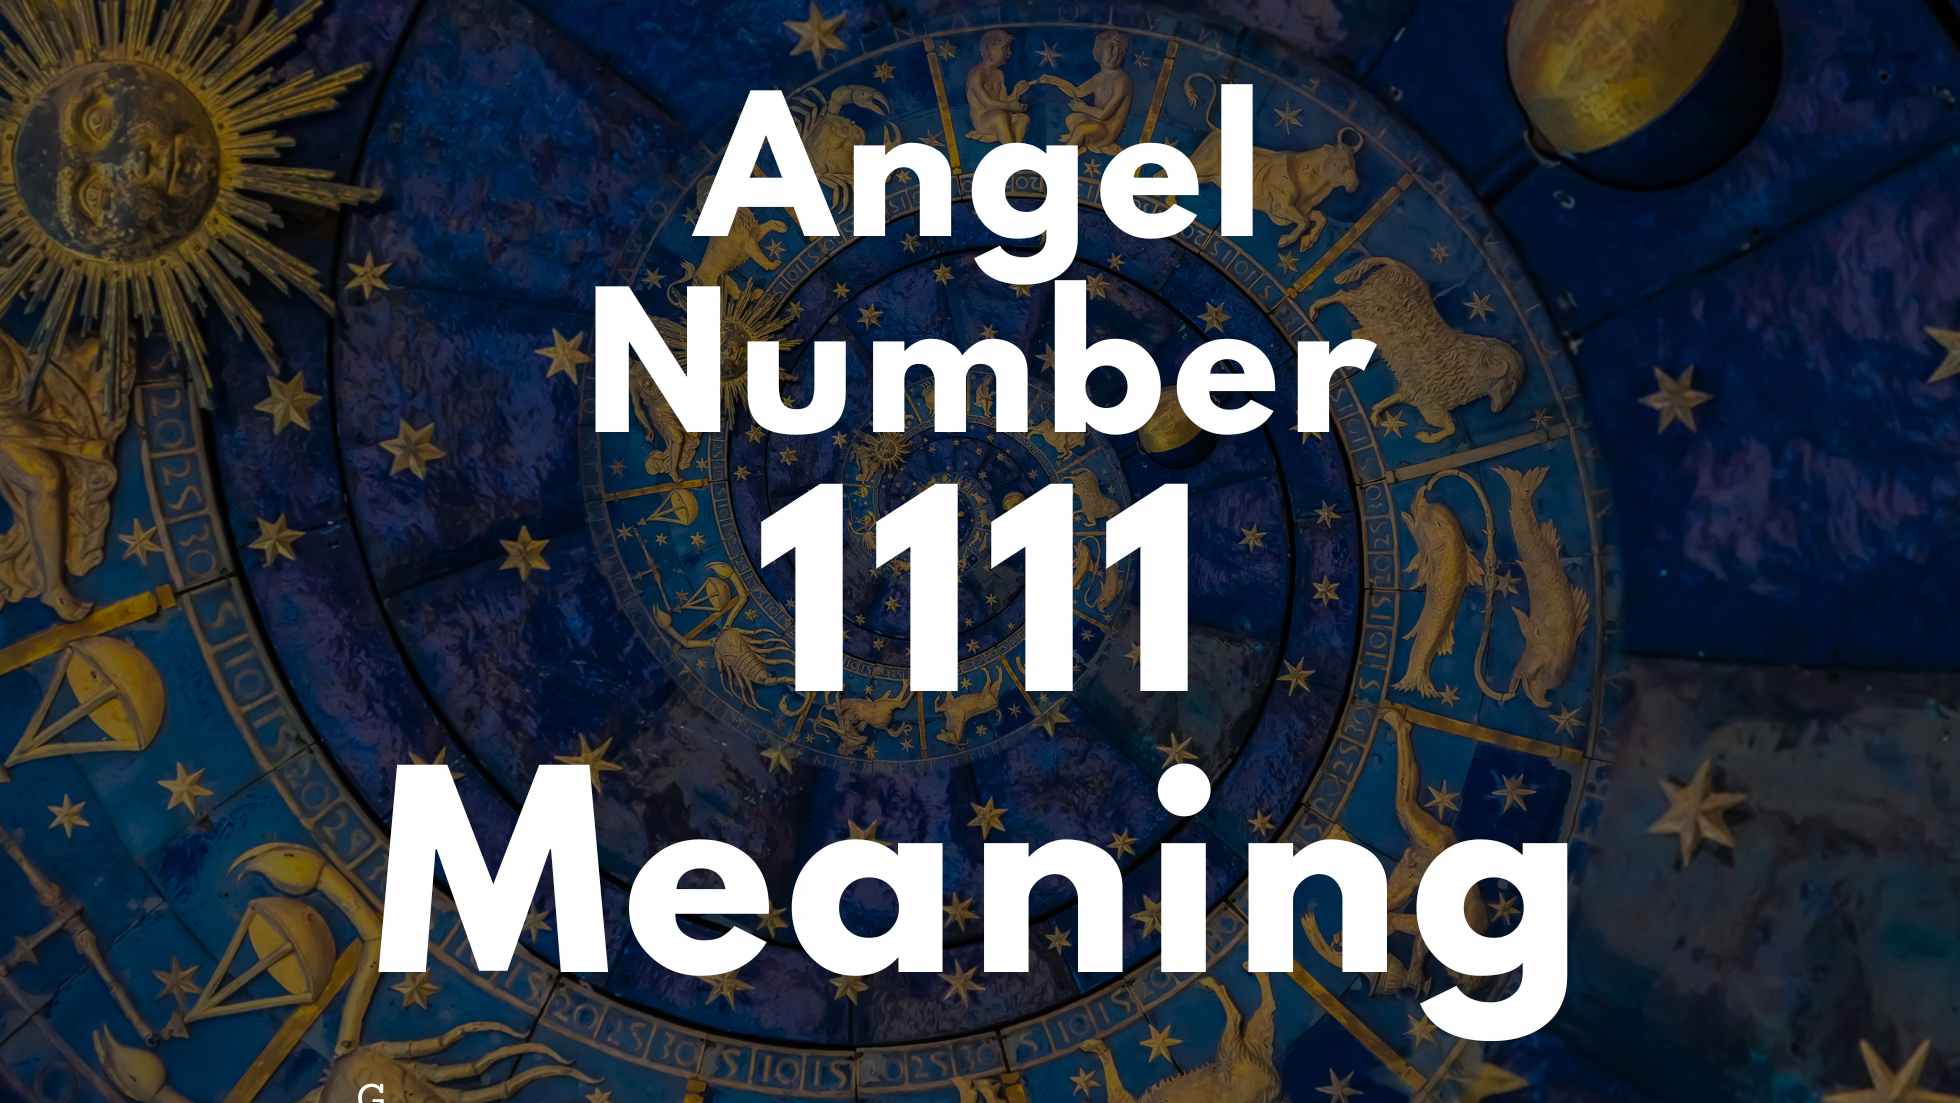 Angel Number 1111 Spiritual Meaning, Symbolism, and Significance